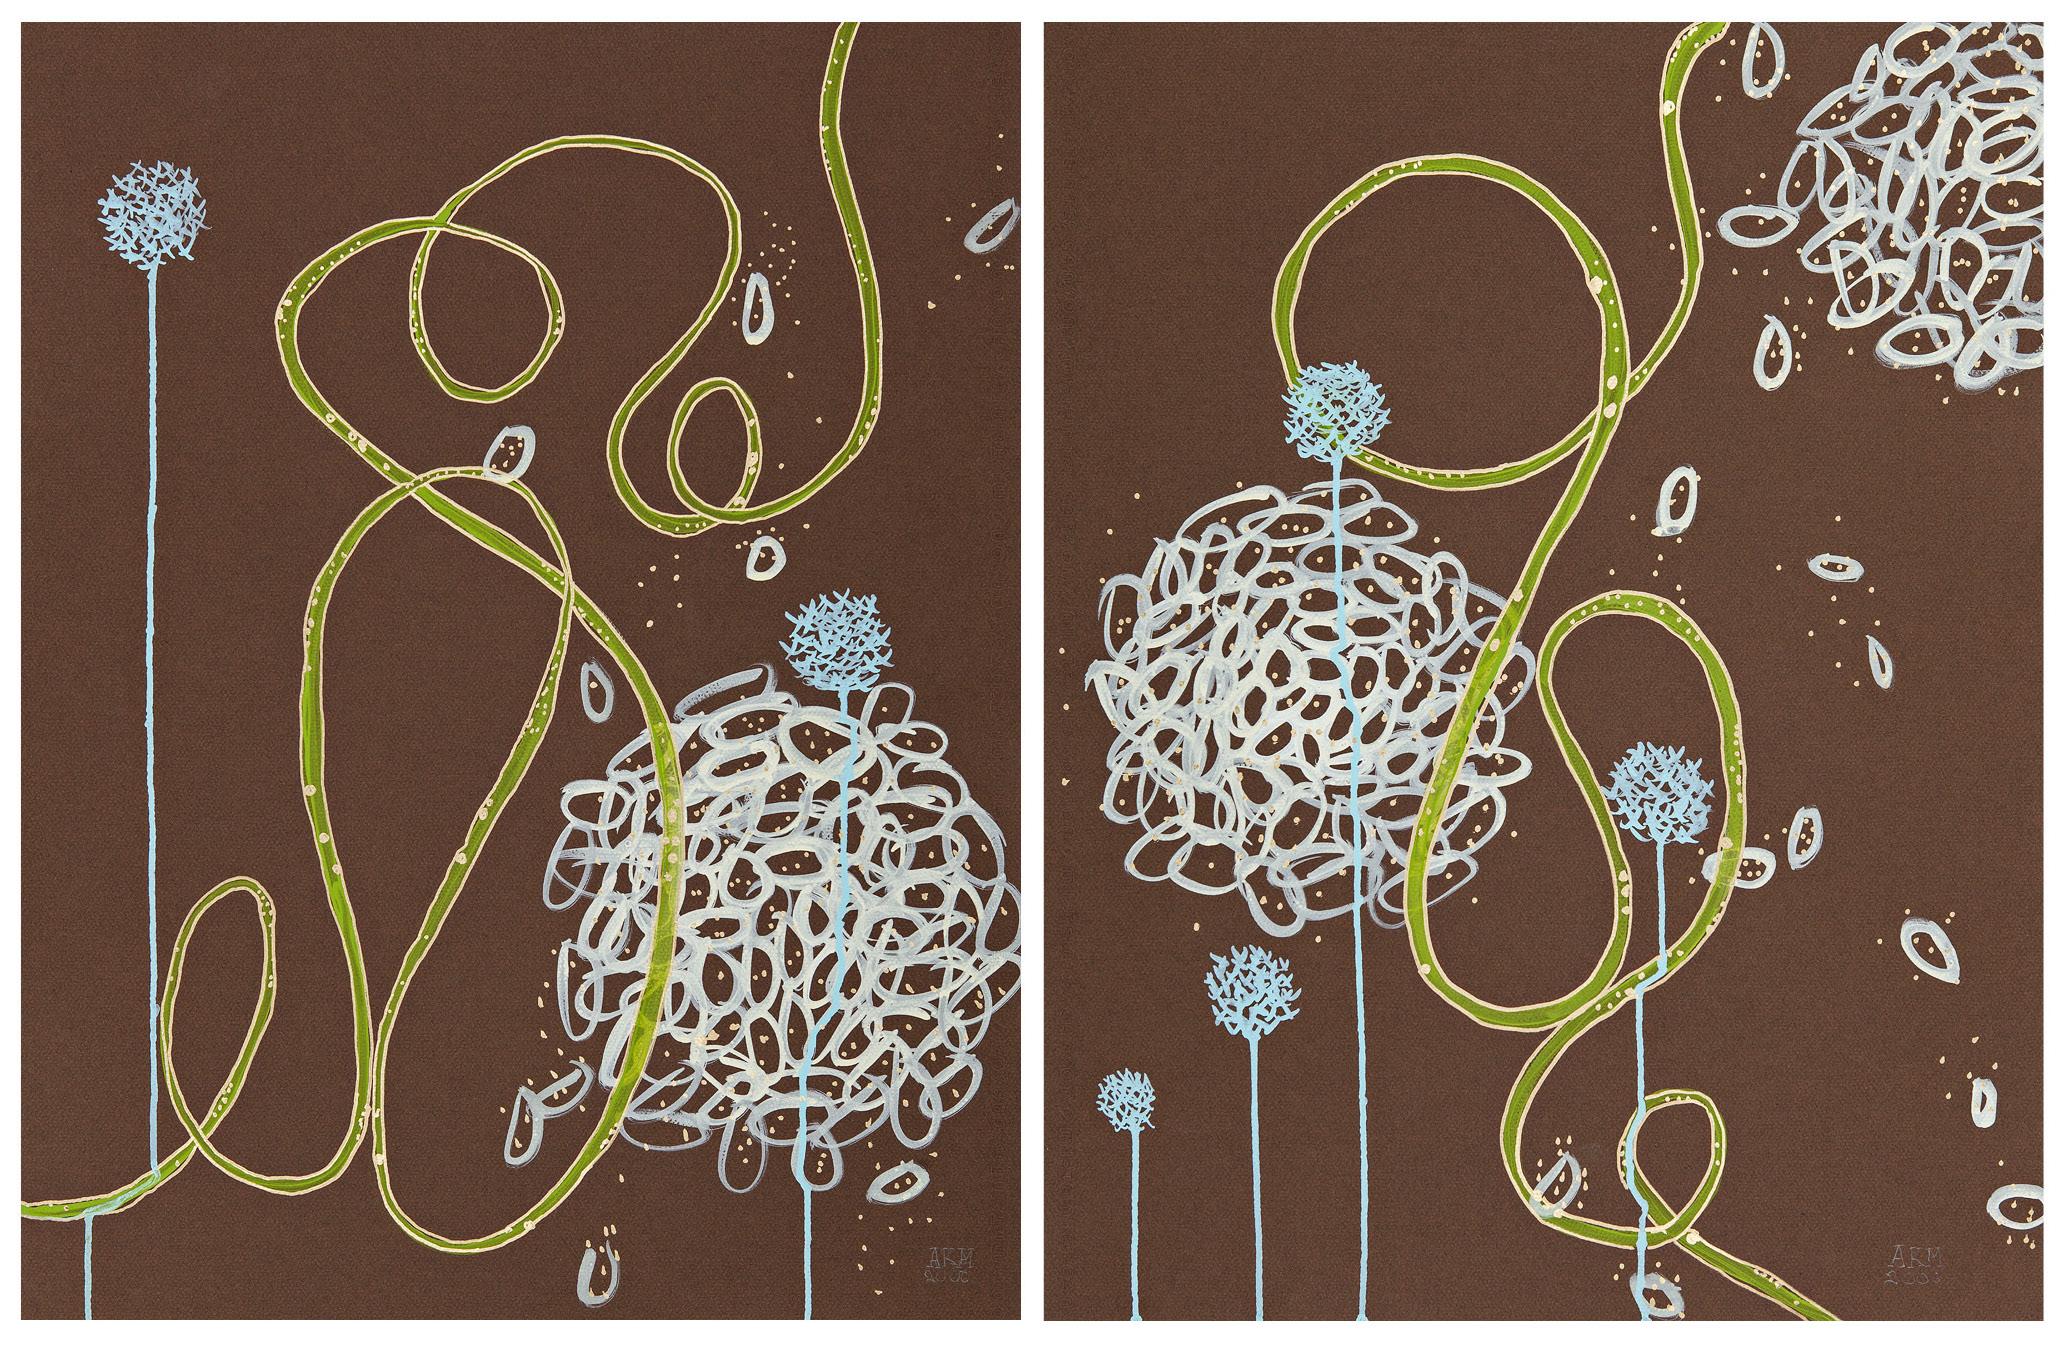 Abstract Painting  by Alex K. Mason, Ink, Acrylic and Gouache on Paper. "Brown Paper With Green Gold Ribbon Diptych" unframed 25.5"H x 19.5"W each. Brown, Blue, Green, Gold, 2006.
It is the expression of making marks for canvas or paper, which